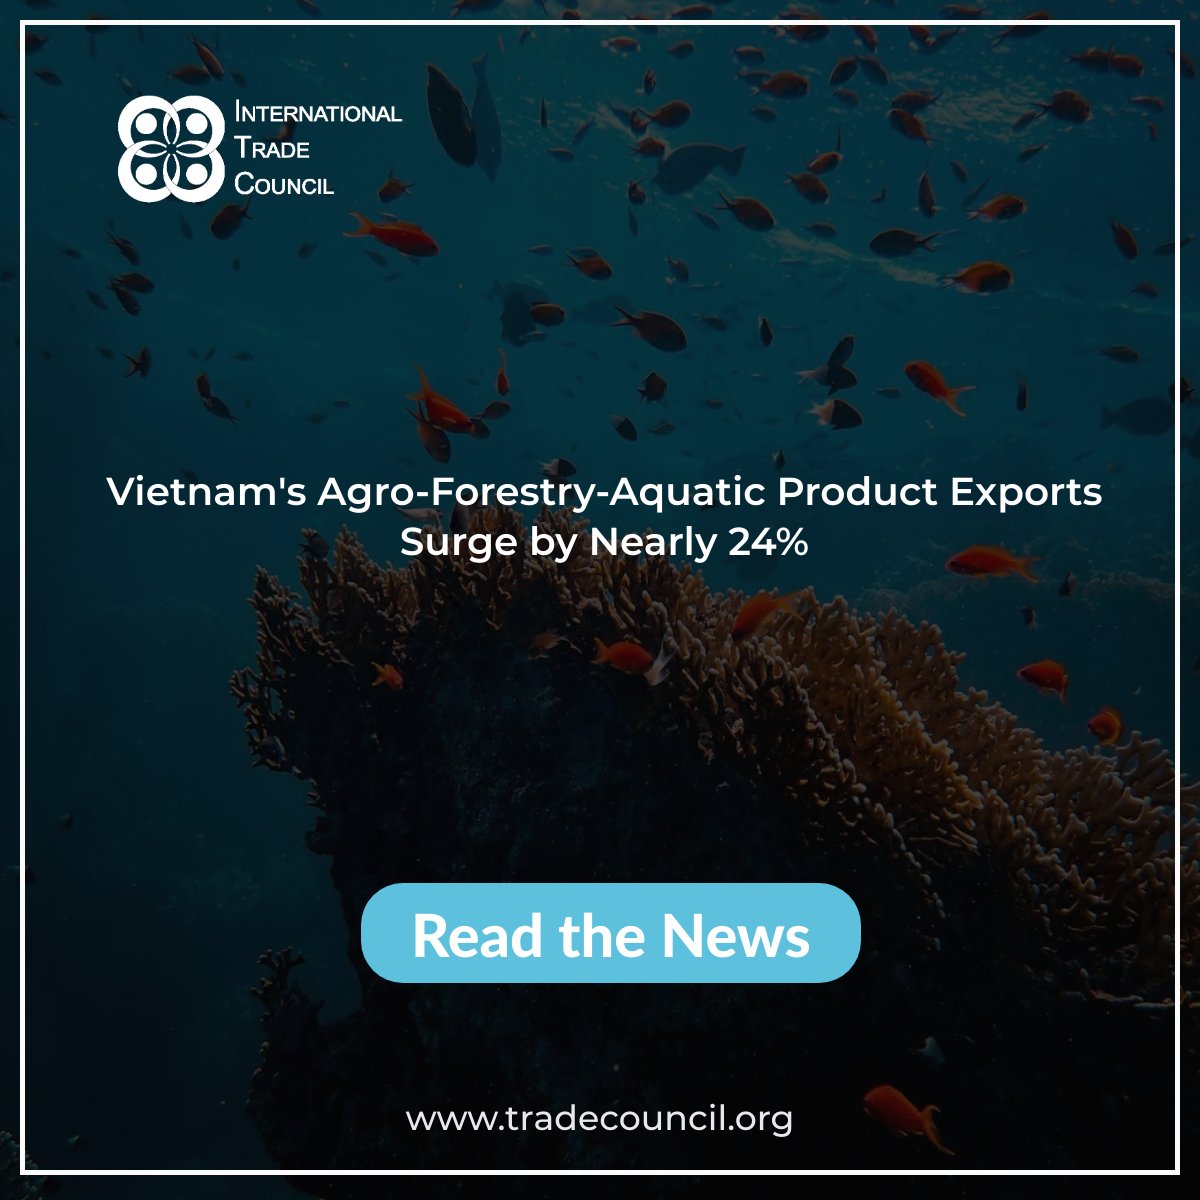 Vietnam's Agro-Forestry-Aquatic Product Exports Surge by Nearly 24%
Read The News: tradecouncil.org/vietnams-agro-…
#ITCNewsUpdates #BreakingNews #VietnamExports #AgroForestryAquaticProducts #EconomicGrowth #TradeSurplus #MarketExpansion